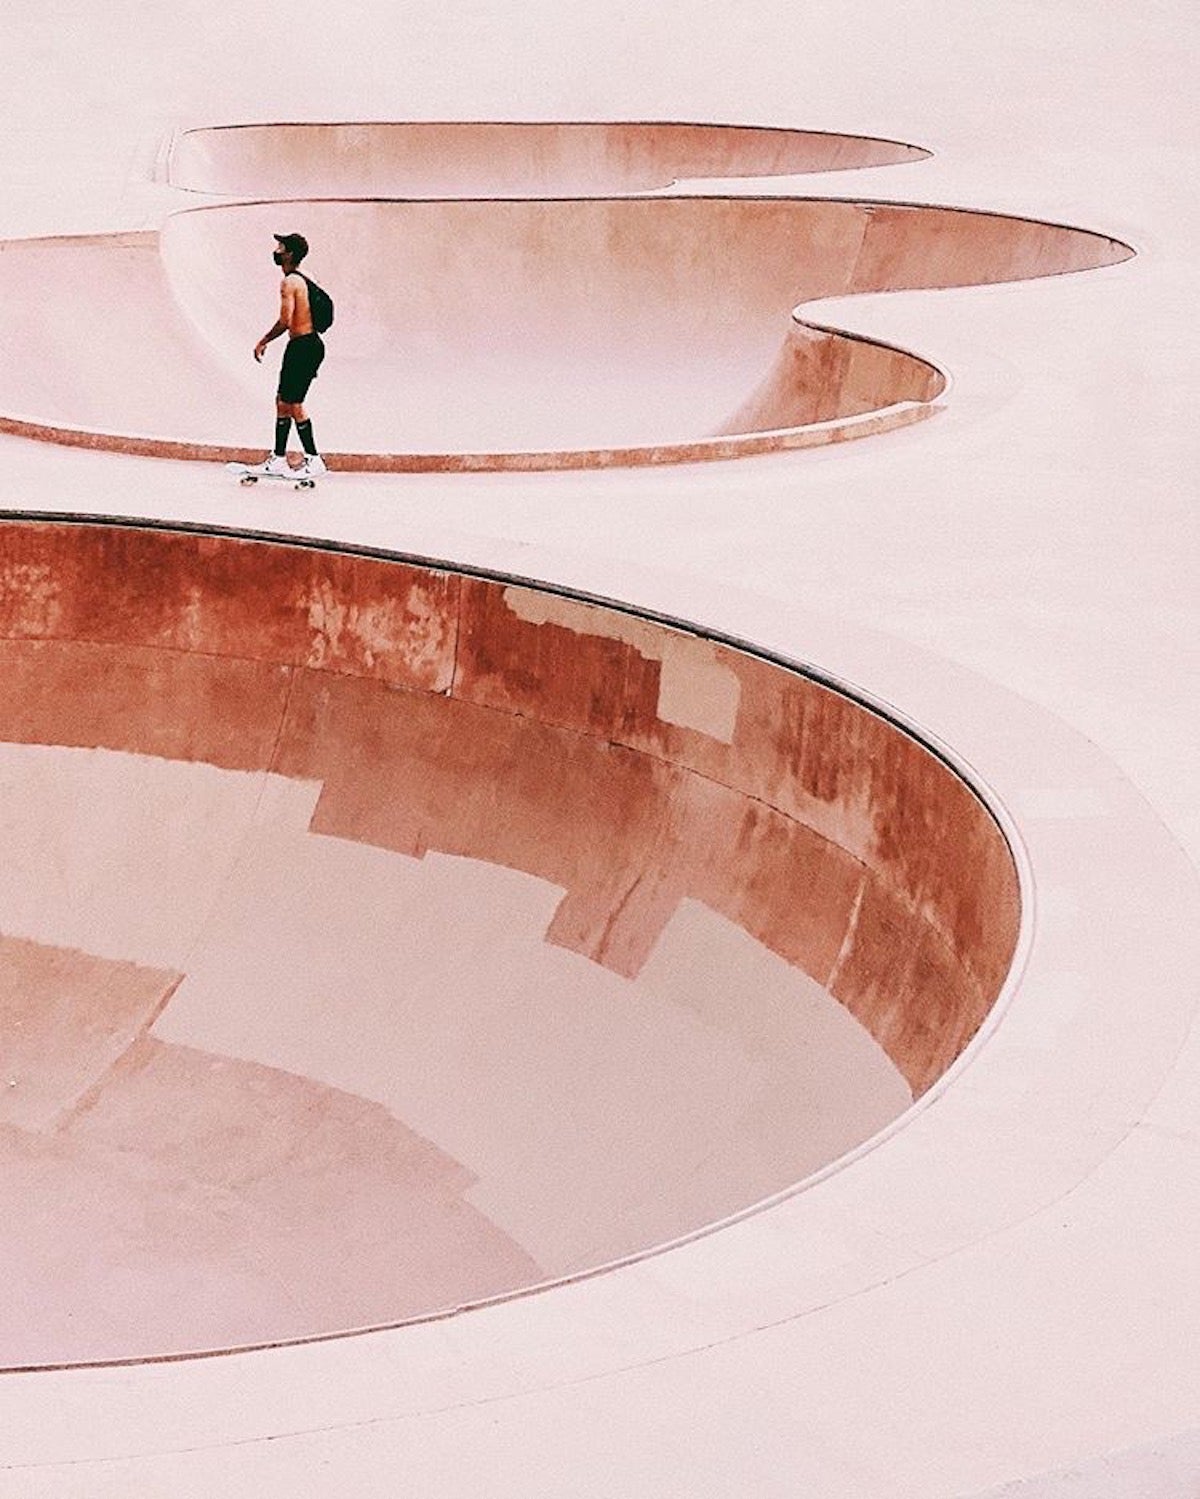 A skateboarder riding between two skate bowls with a red filter on the shot